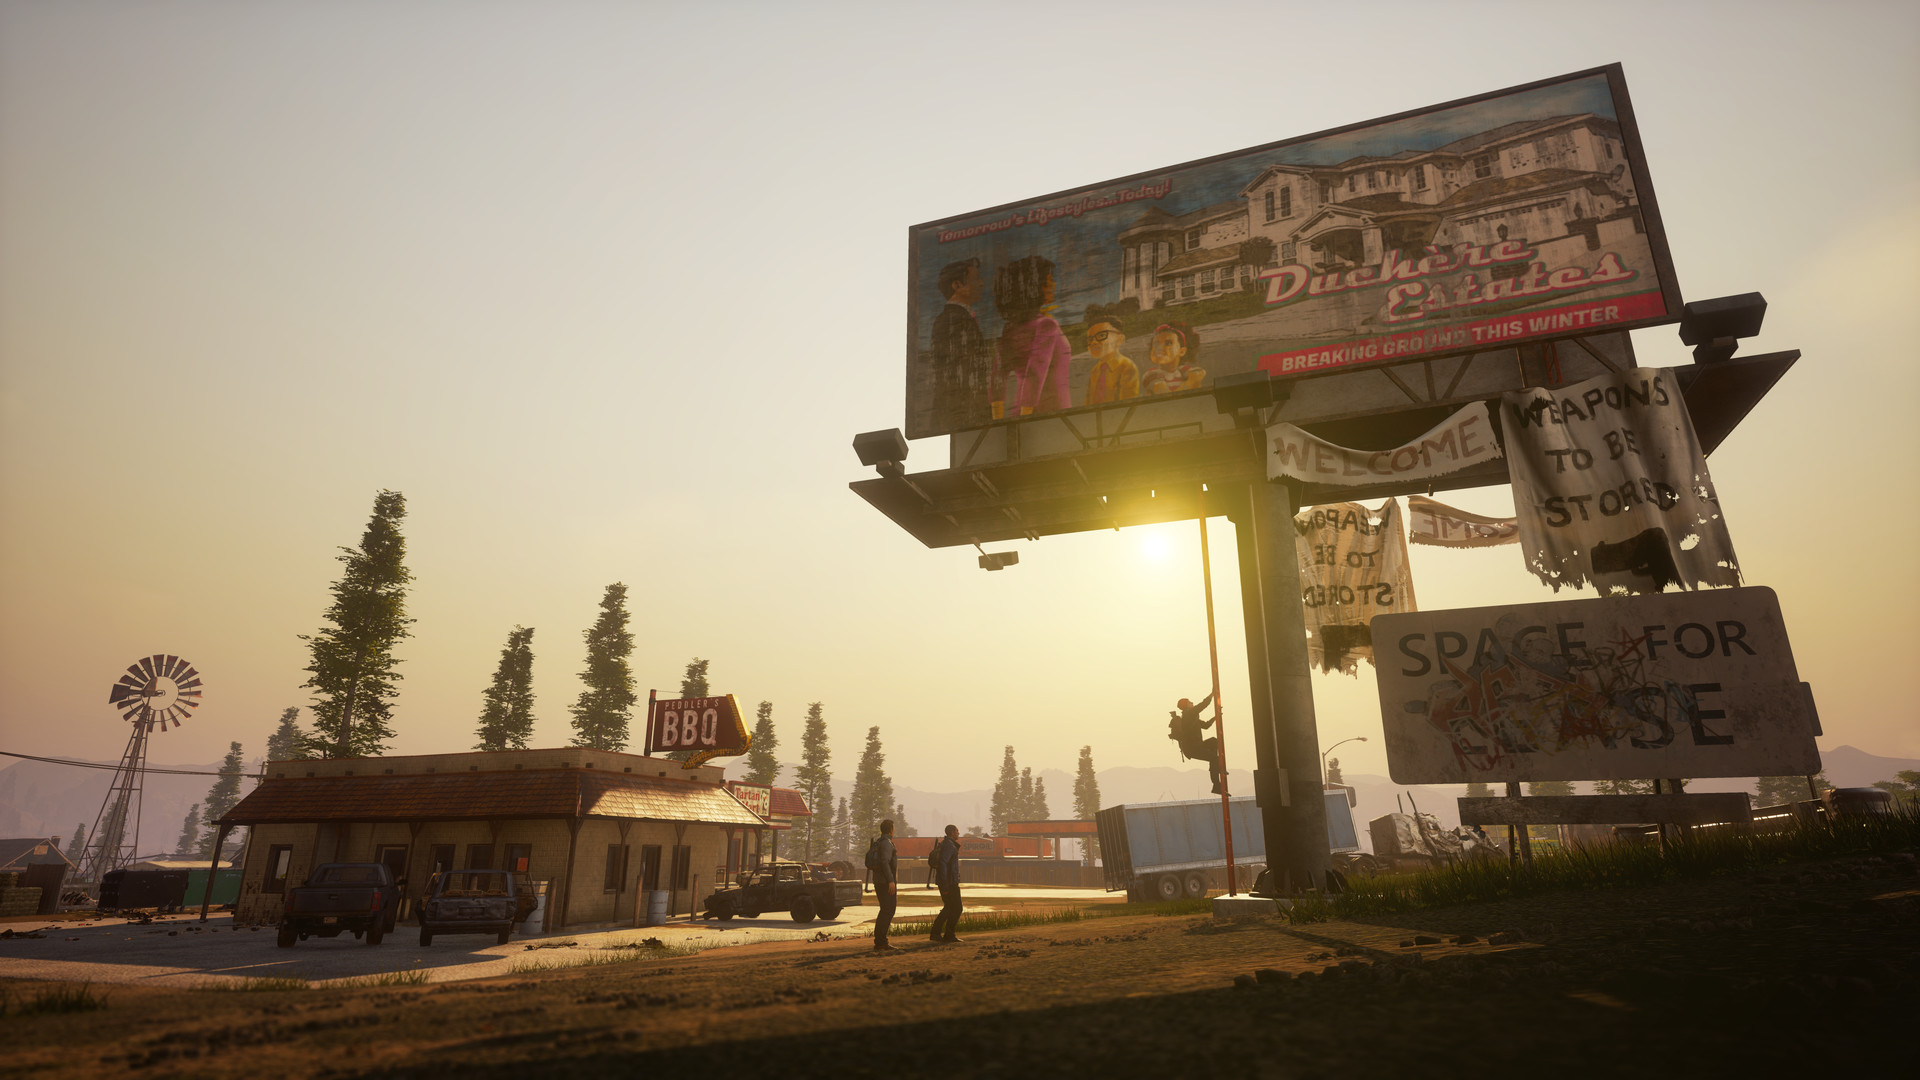 Co-op Is The Best Way To Play State Of Decay 2 